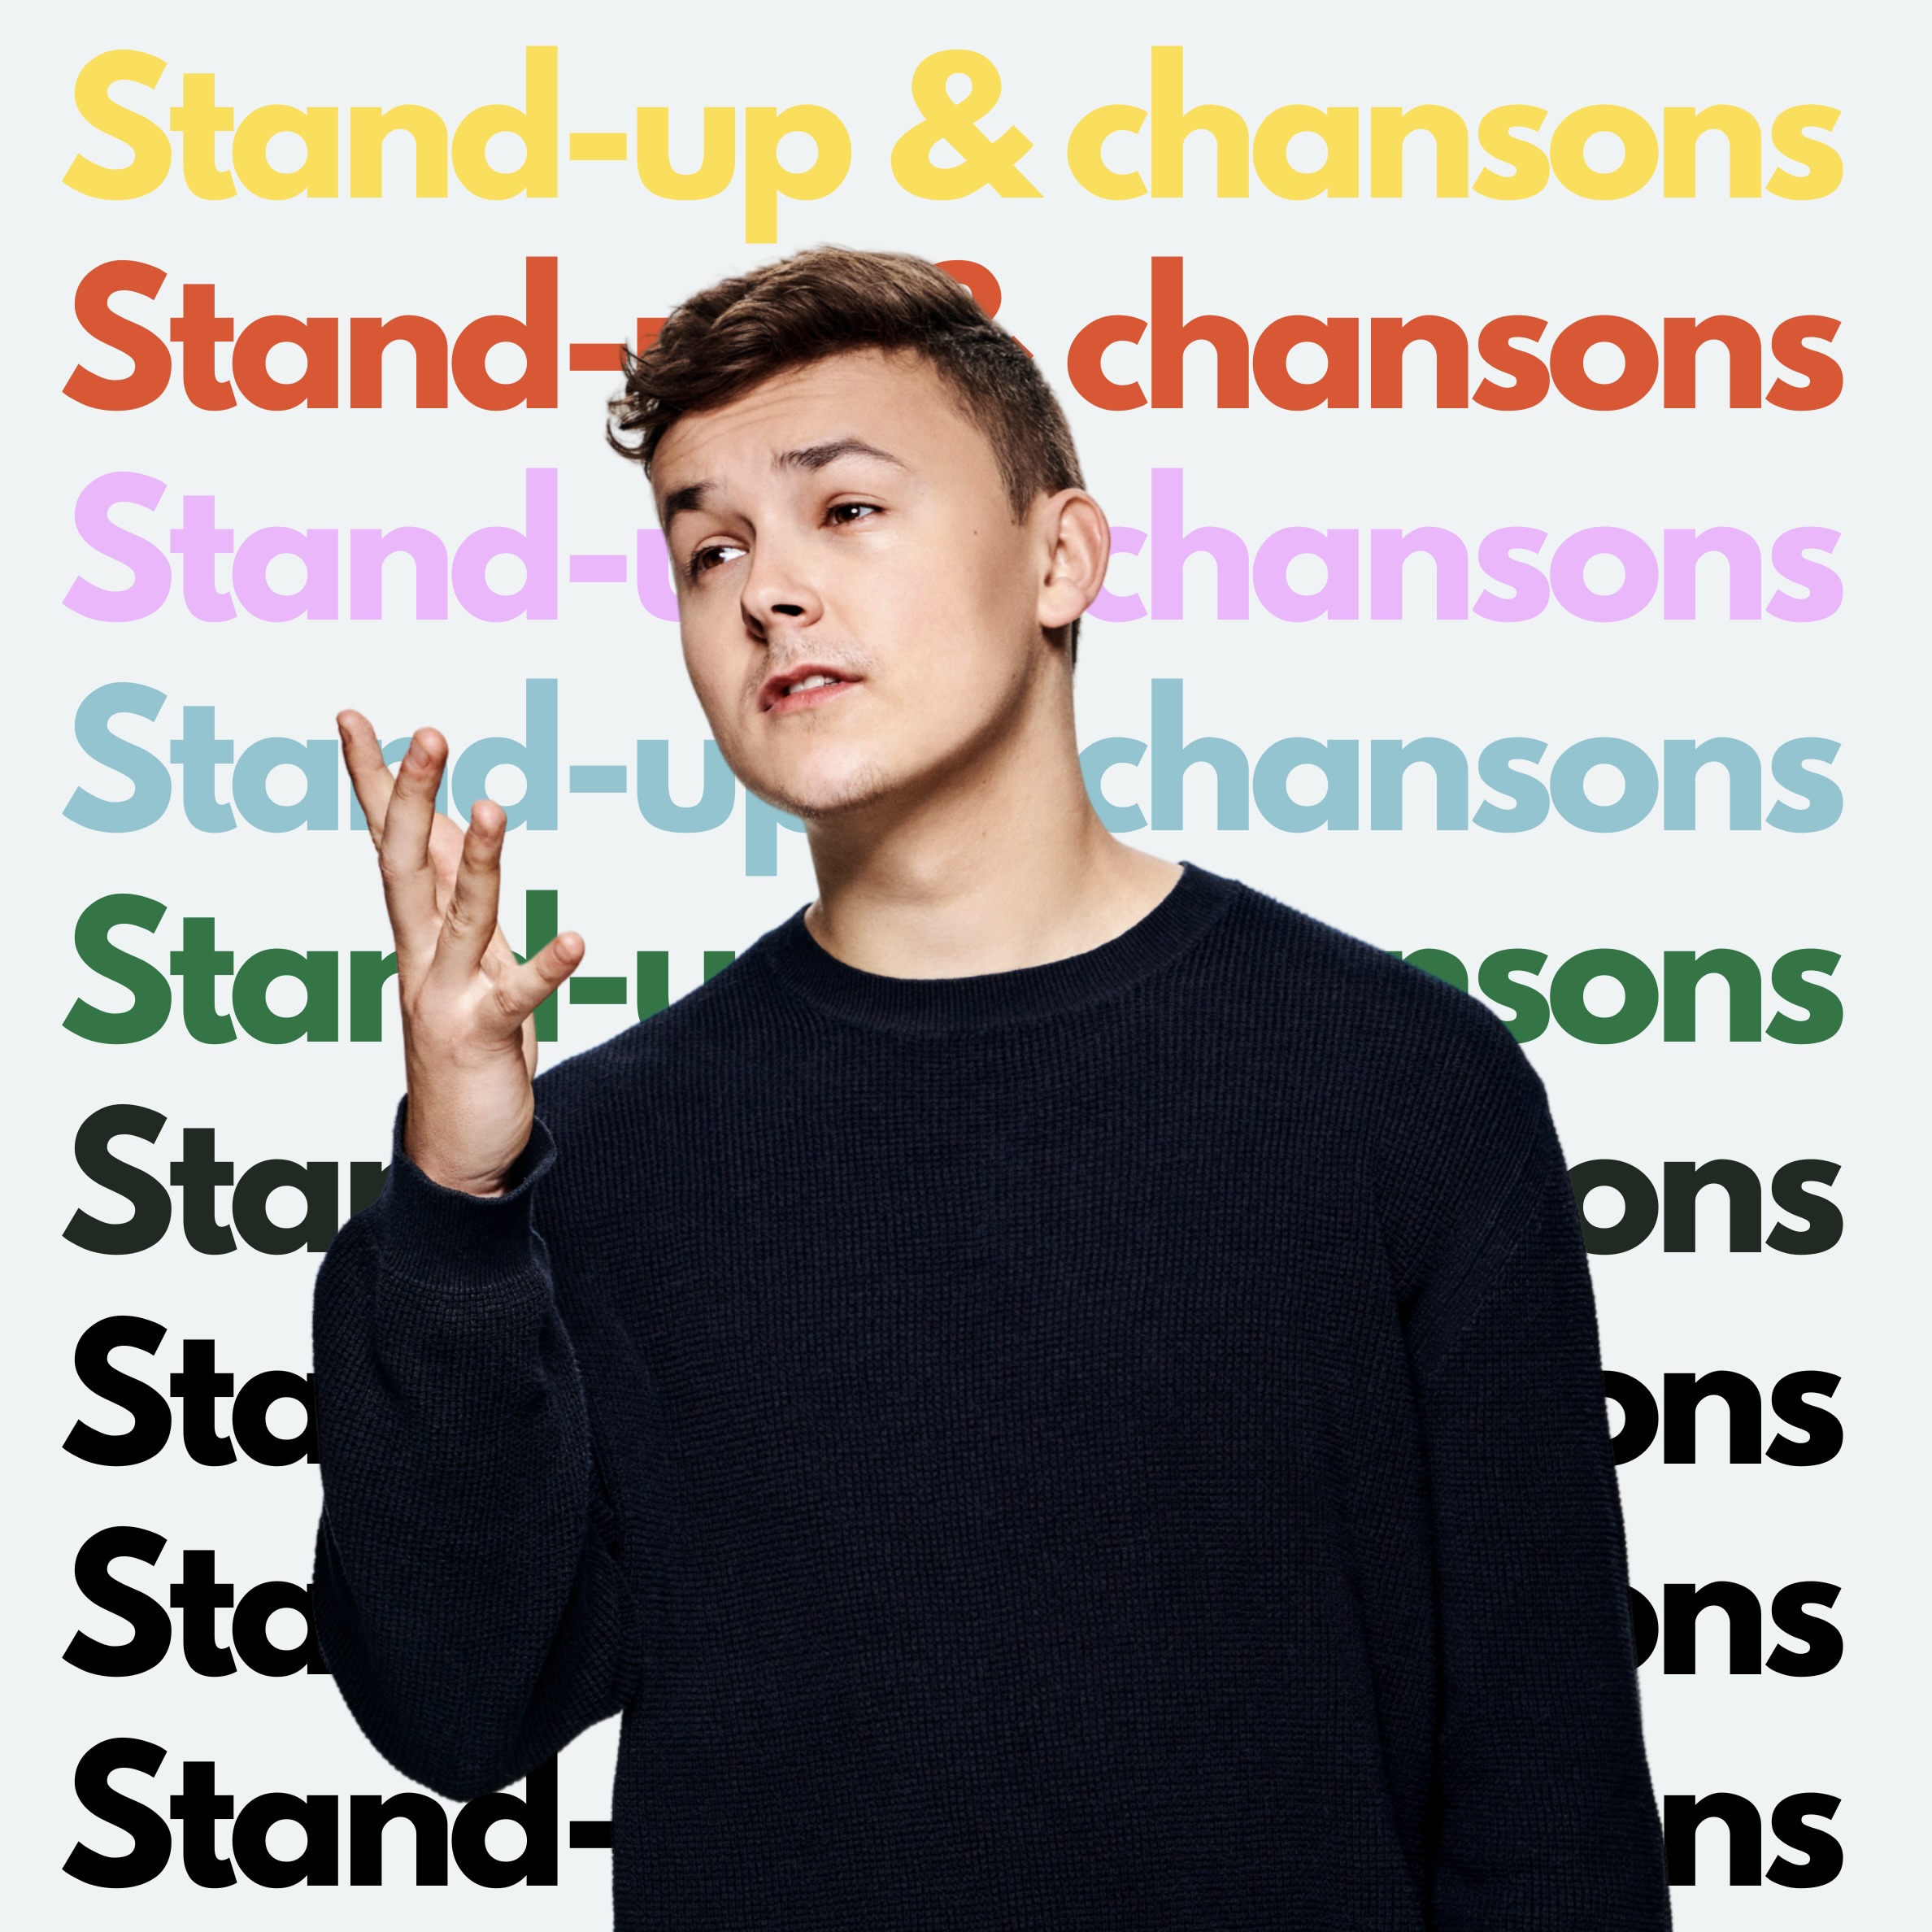 Stand-up et chansons